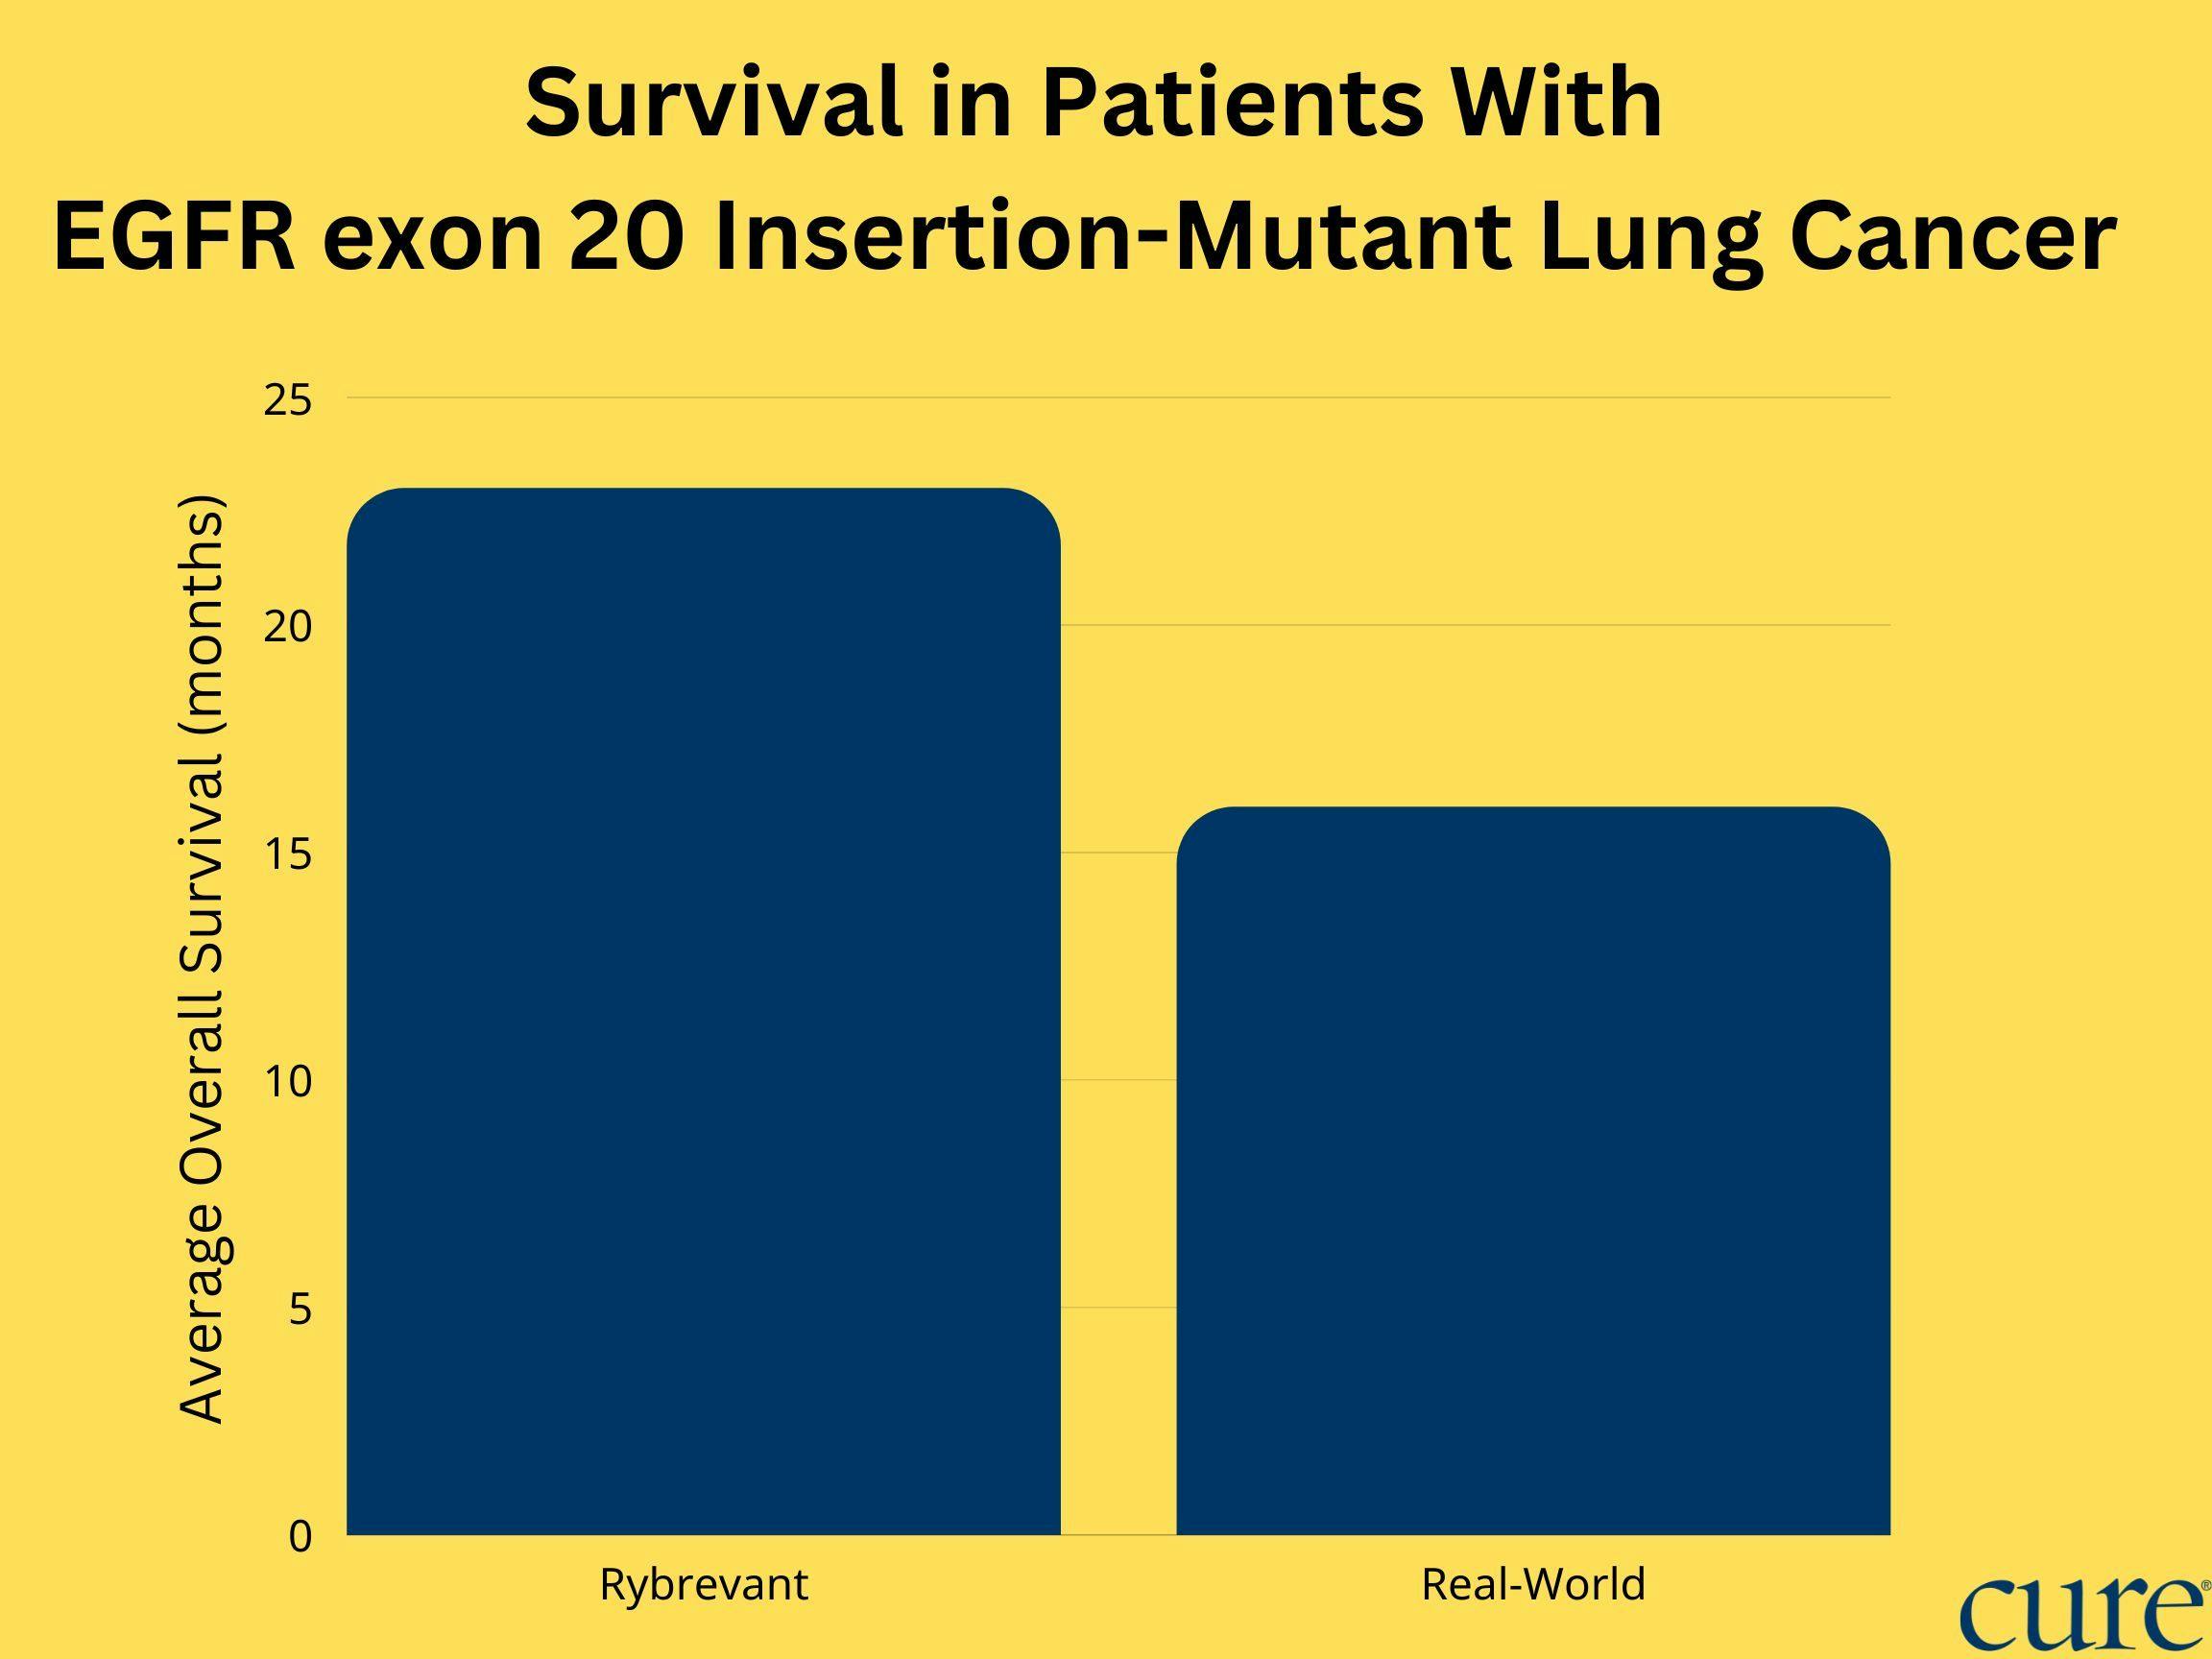 Rybrevant bested real-world treatments in overall survival. 